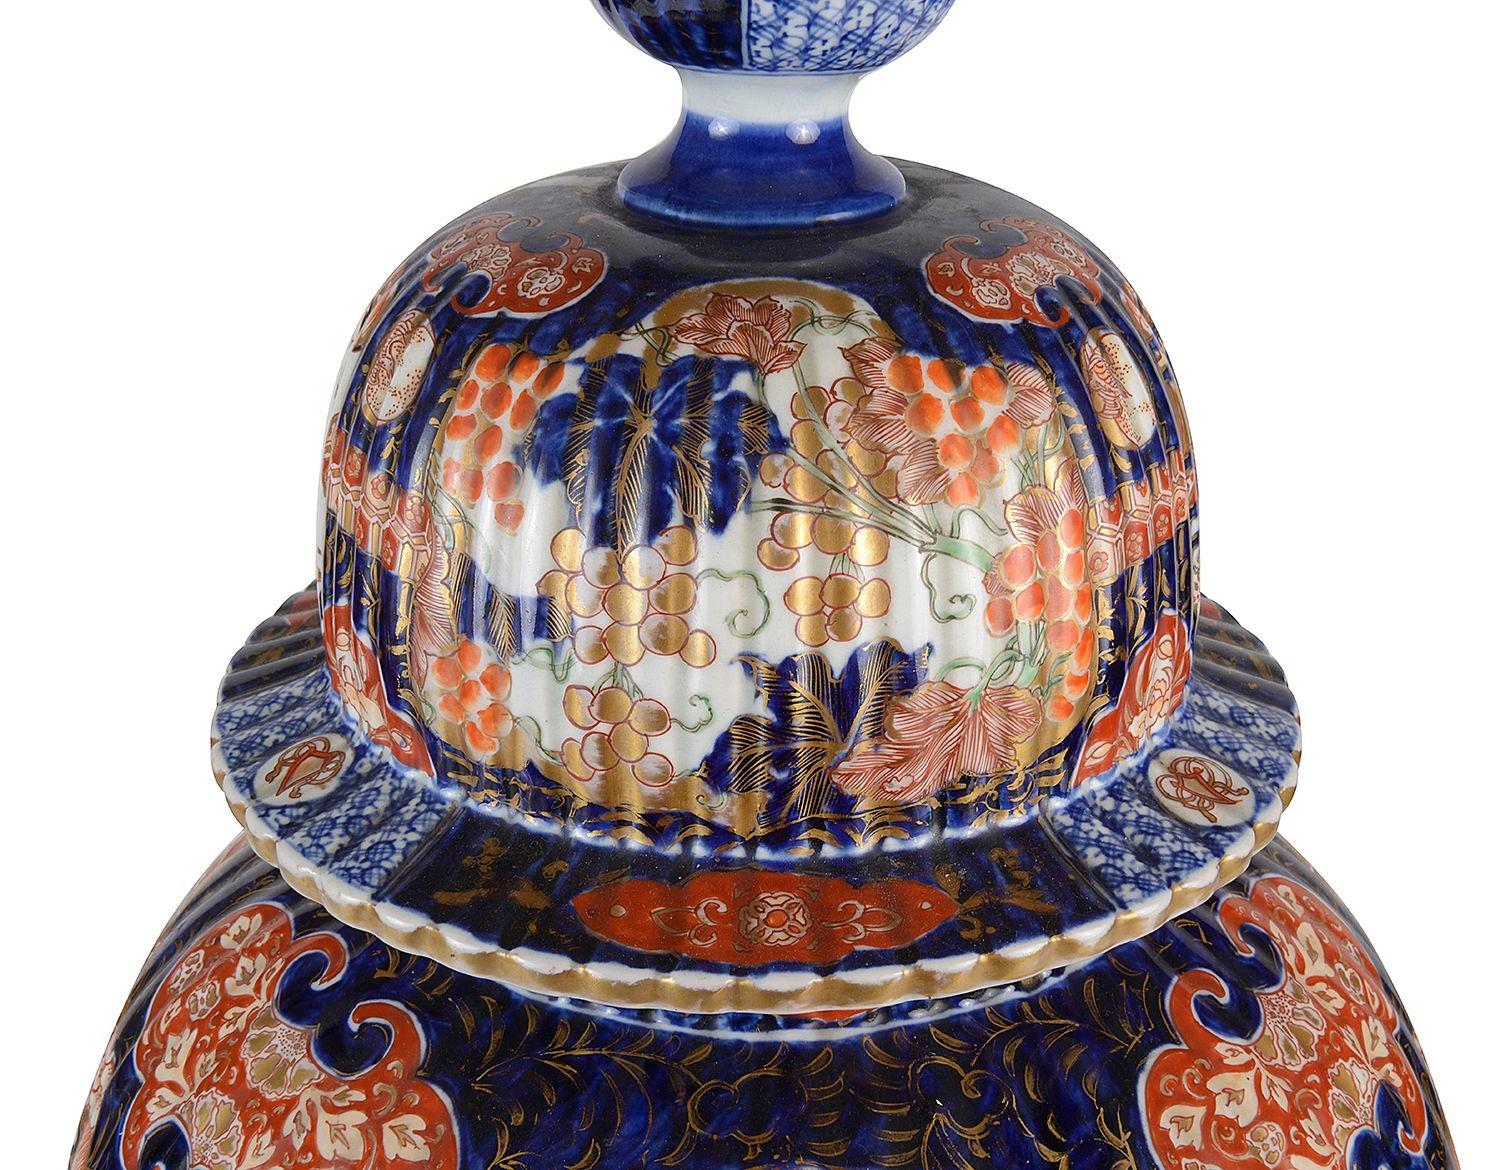 A very impressive and decorative 19th Century Japanese Imari lidded vase. Having raised rib decoration to the lid and vase, wonderful bold blue and orange colouring, classical motif and scrolling gilded highlights. Inset hand painted panels